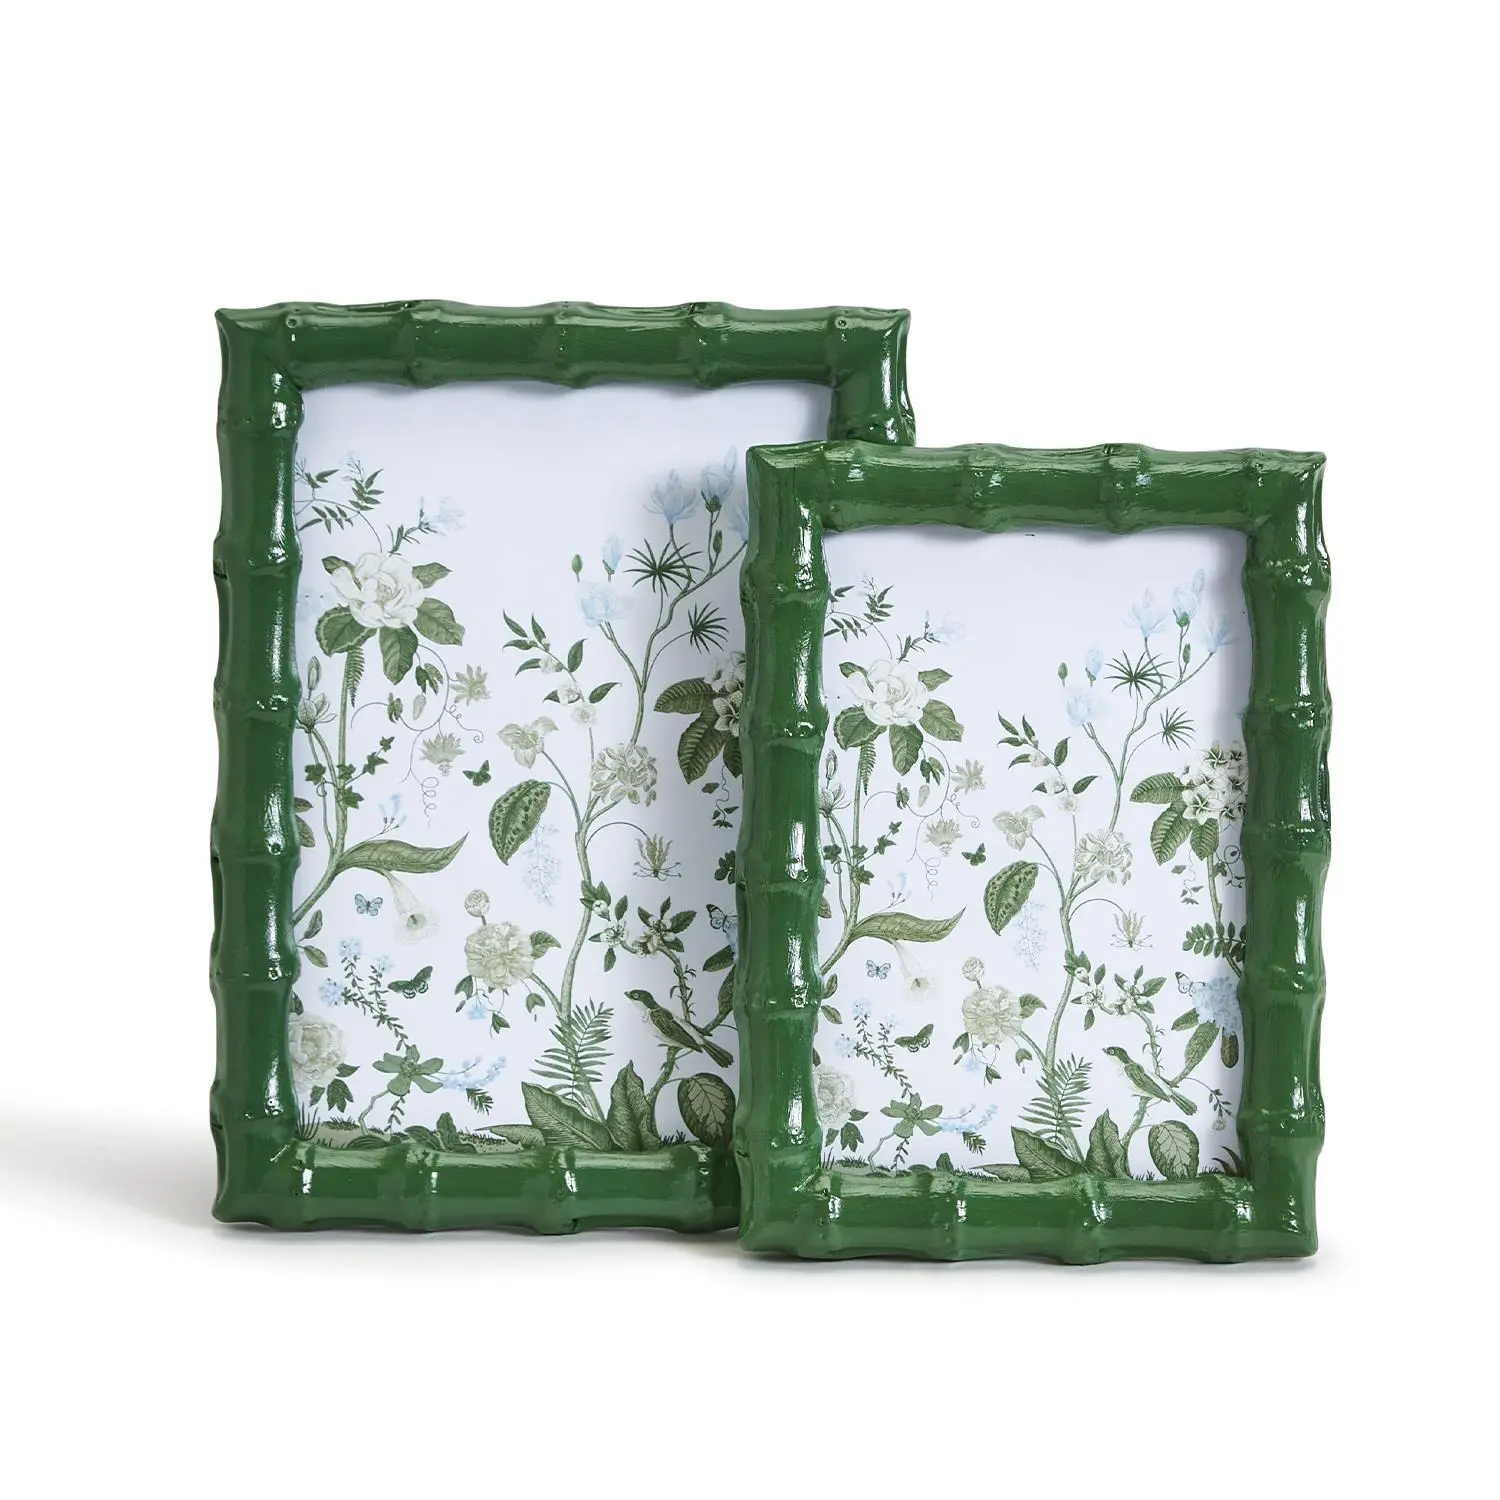 Customised creative Design Countryside Green Faux Bamboo Photo Frame Bamboo Root Bamboo knots Picture Photo Frame - Resin/Glass